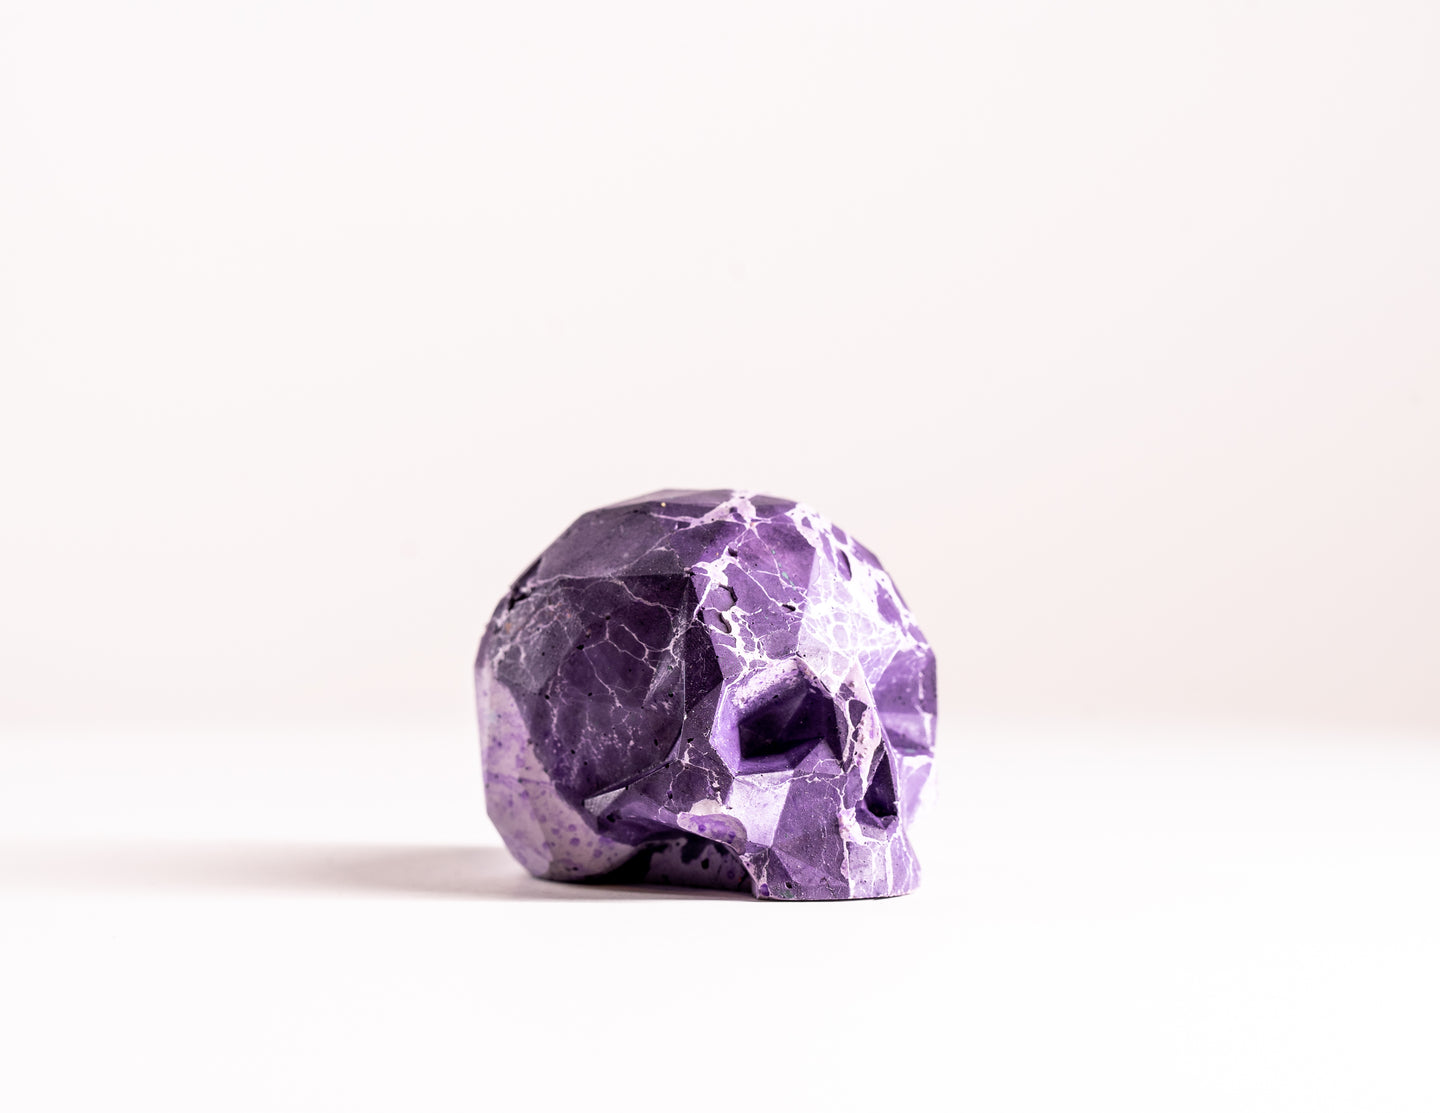 Mini Collectible Skull - Marbled - 04